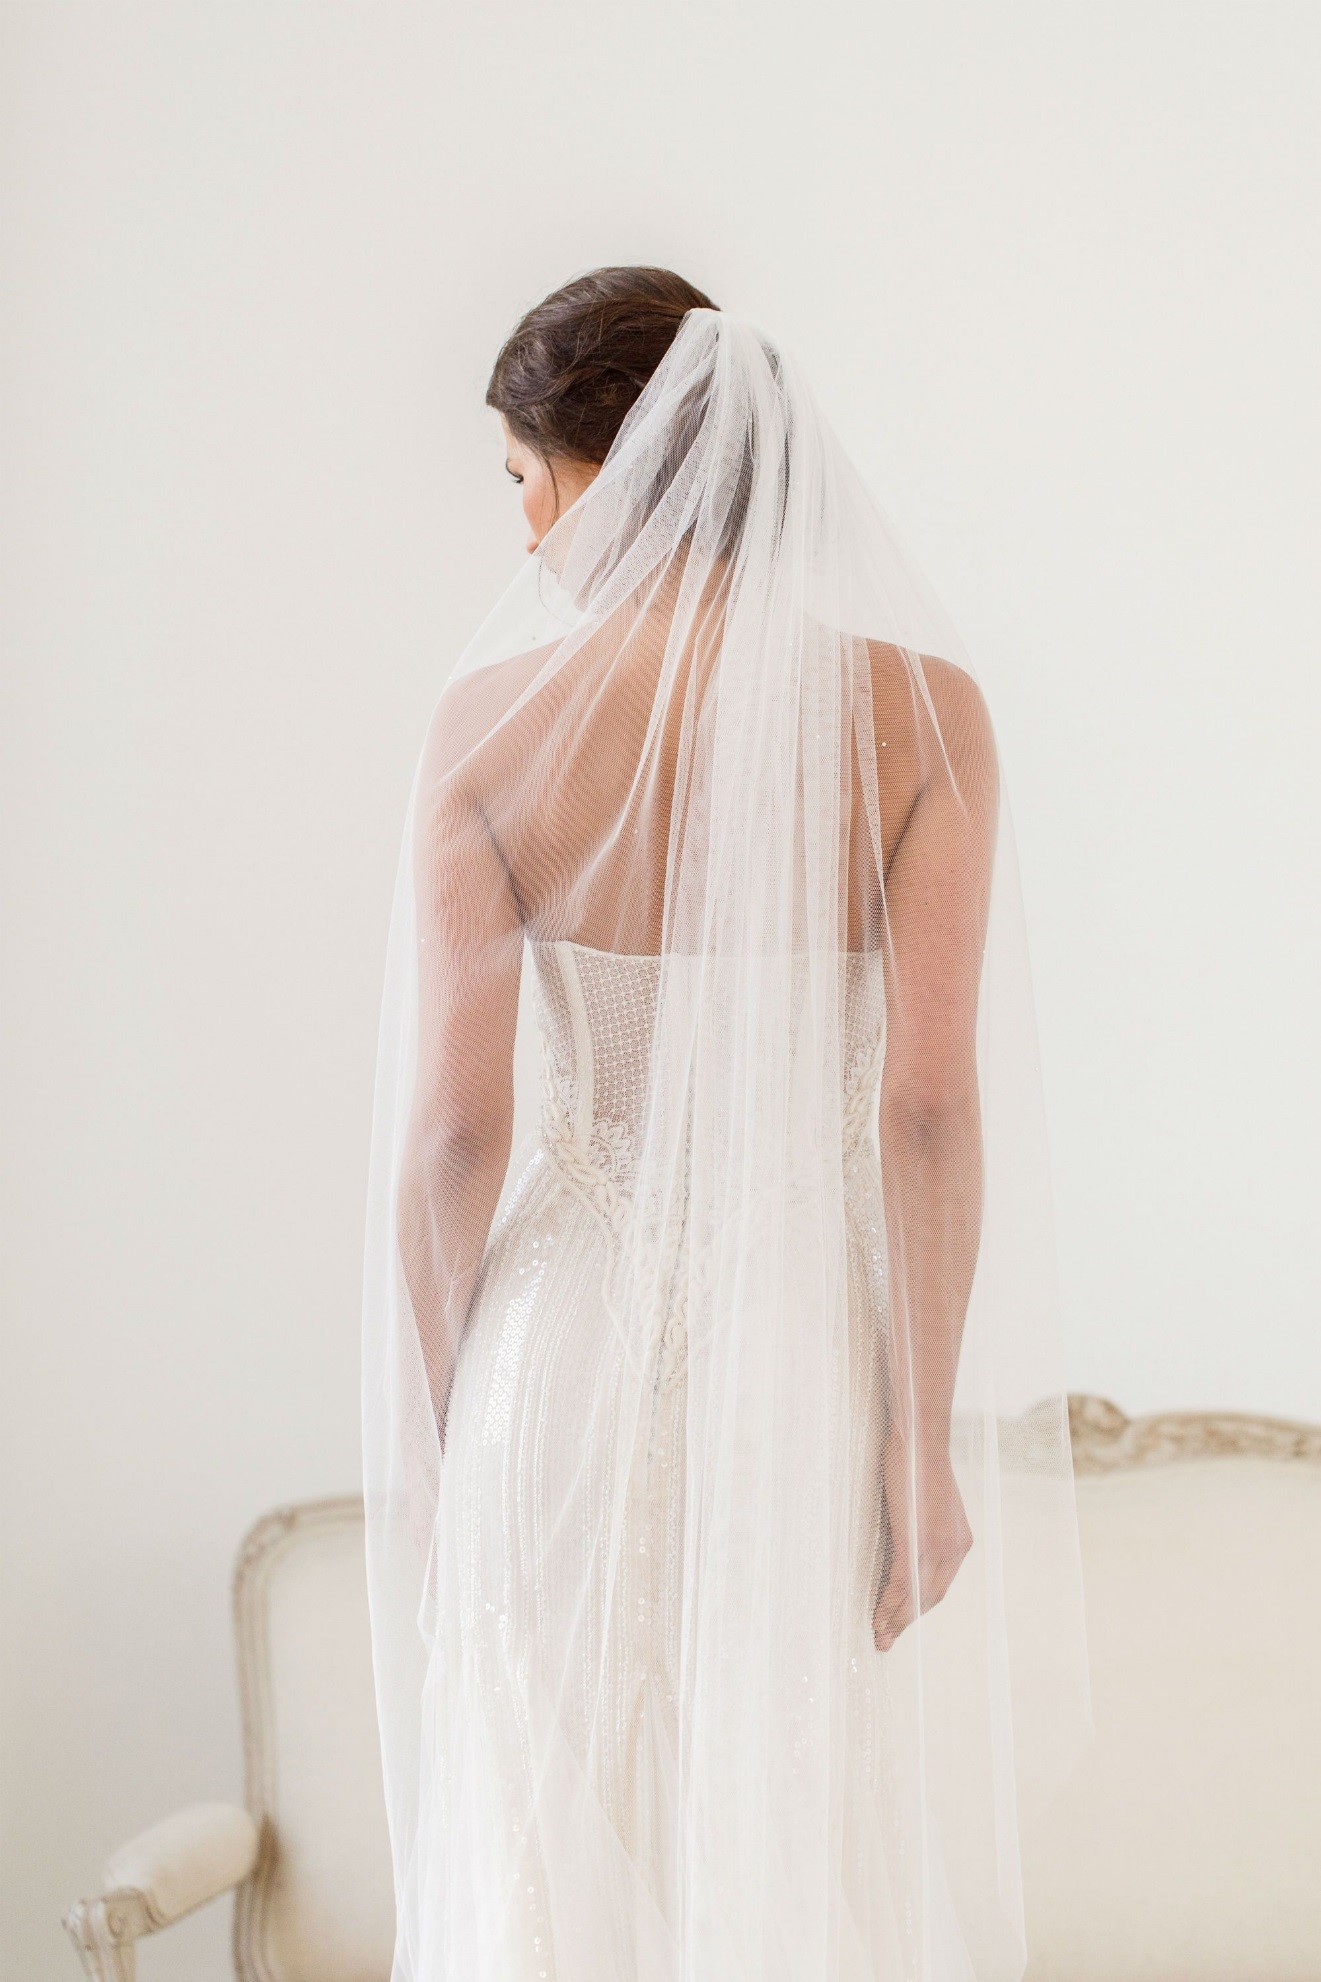 What’s on Trends for Wedding Veils?